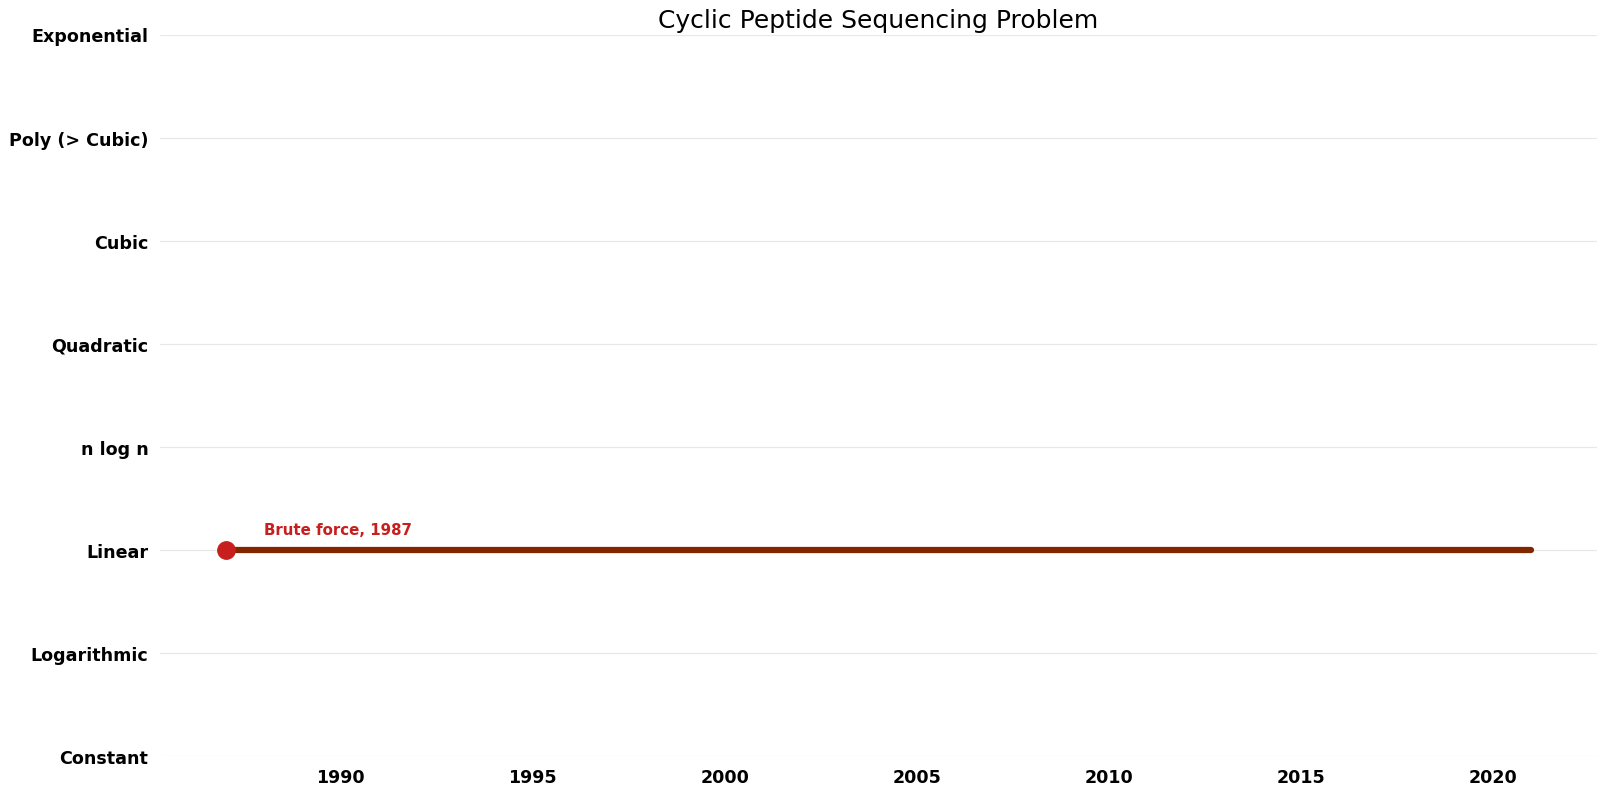 File:Cyclic Peptide Sequencing Problem - Space.png